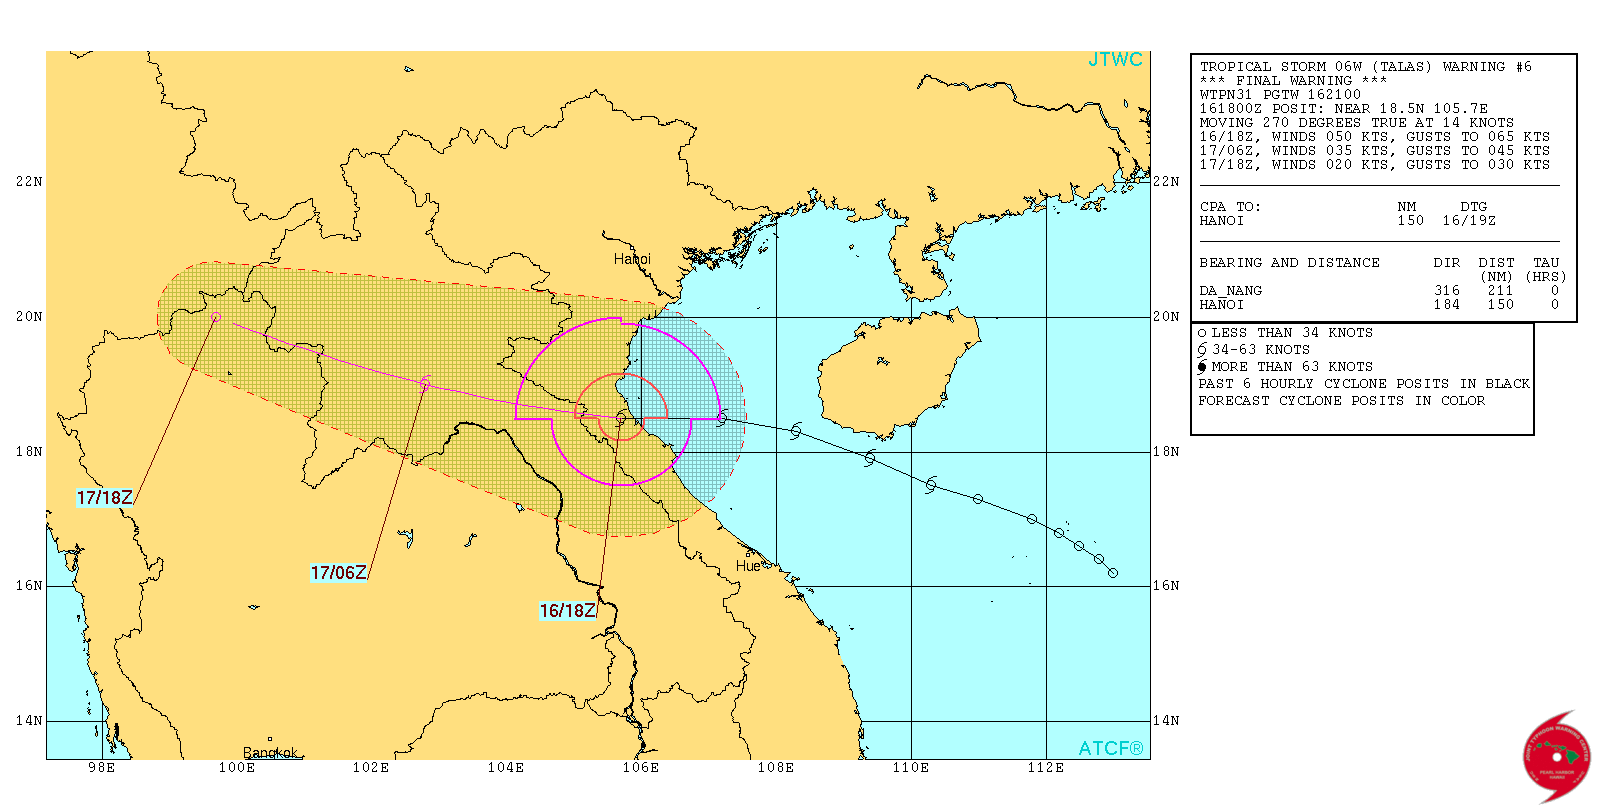 Tropical Storm Talas forecast track by JTWC on July 16, 2017